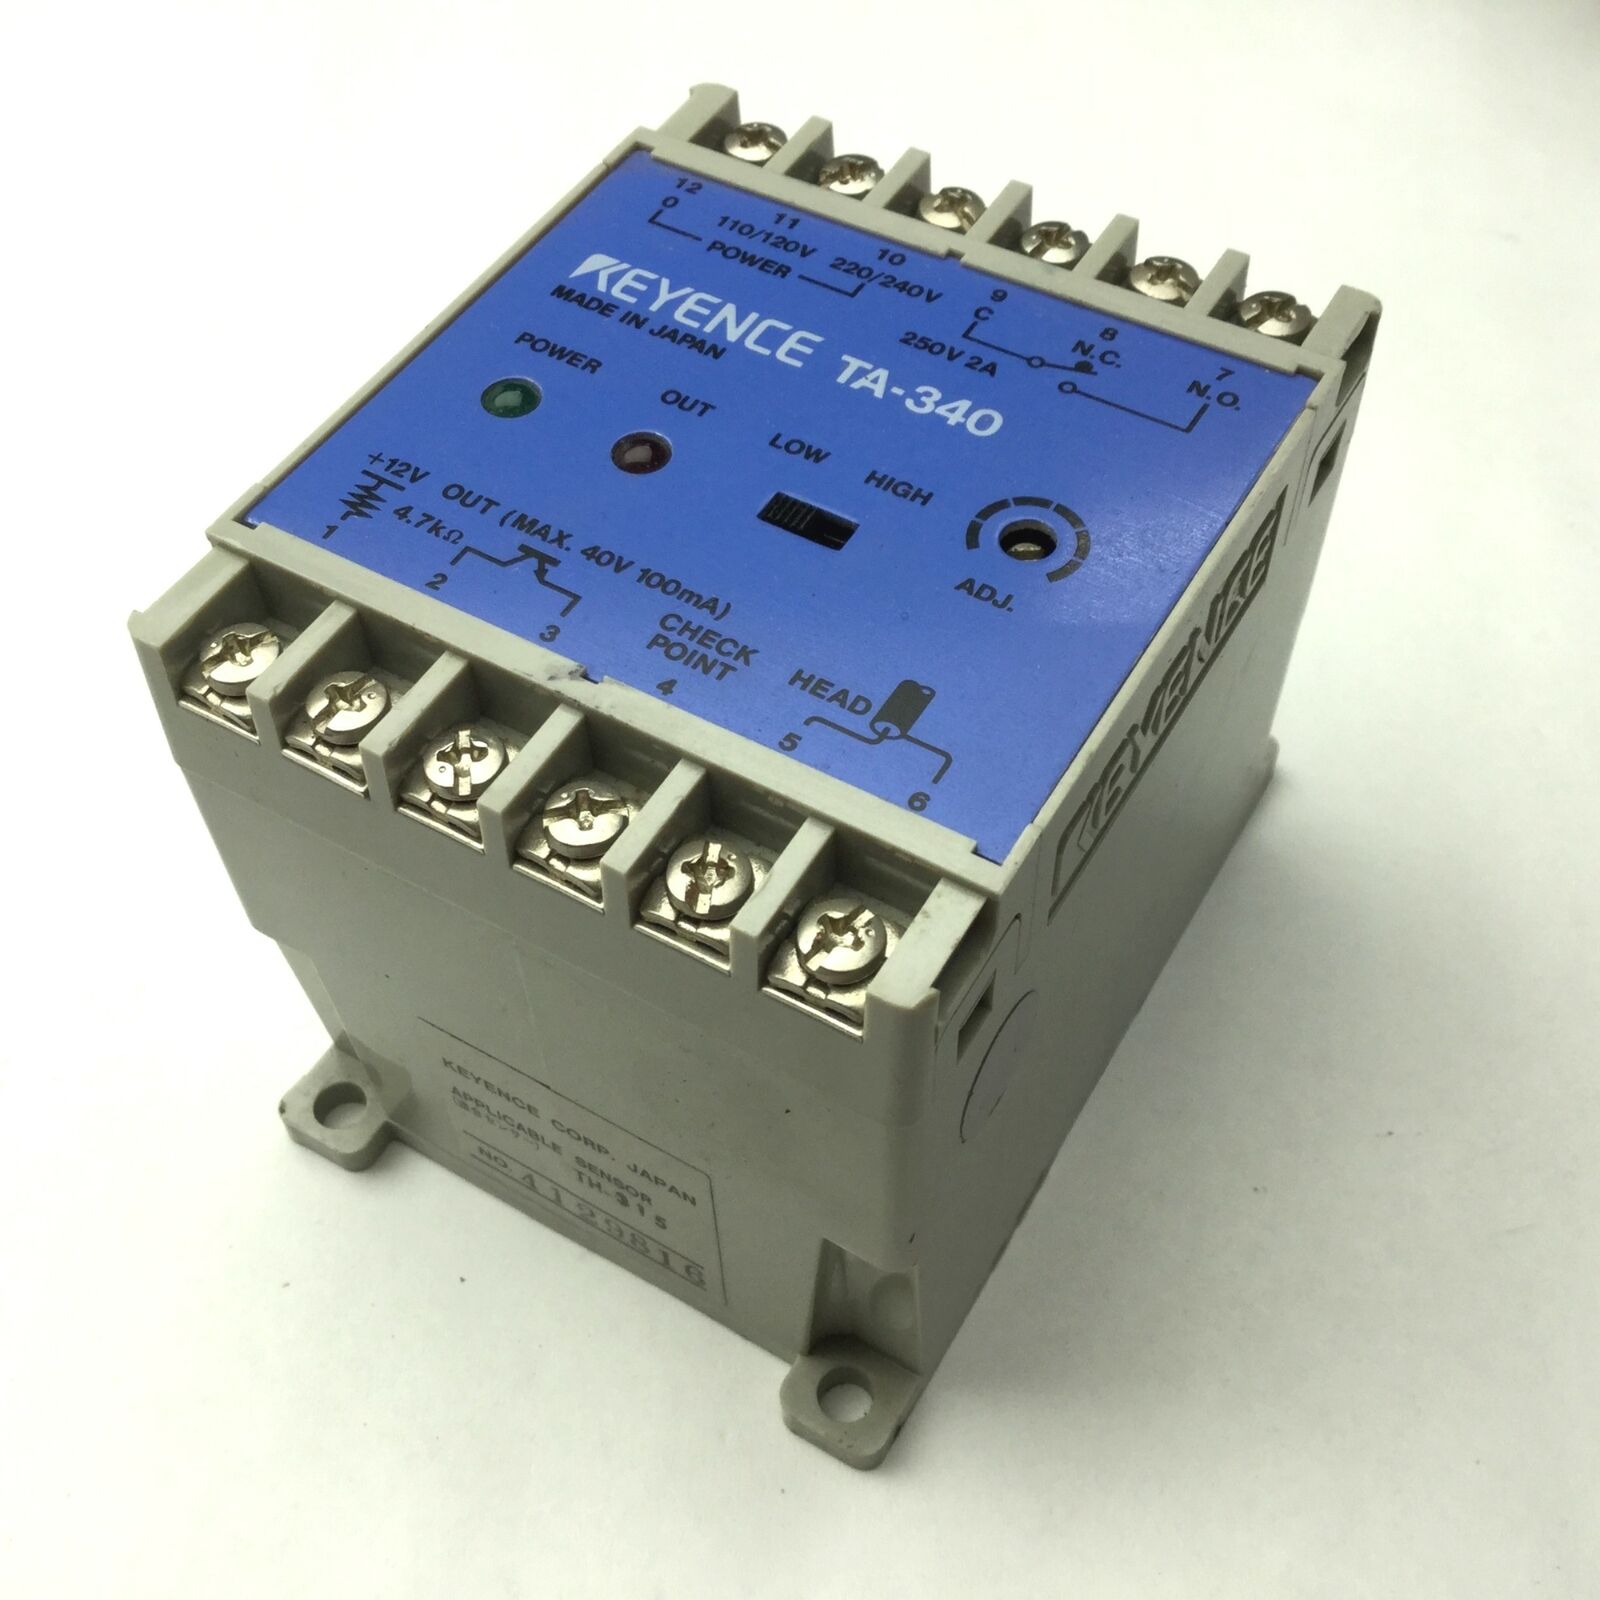 Keyence TA-340 Amplifier Unit SPDT 250VAC 2A Relay Contact Solid-State NPN 100mA